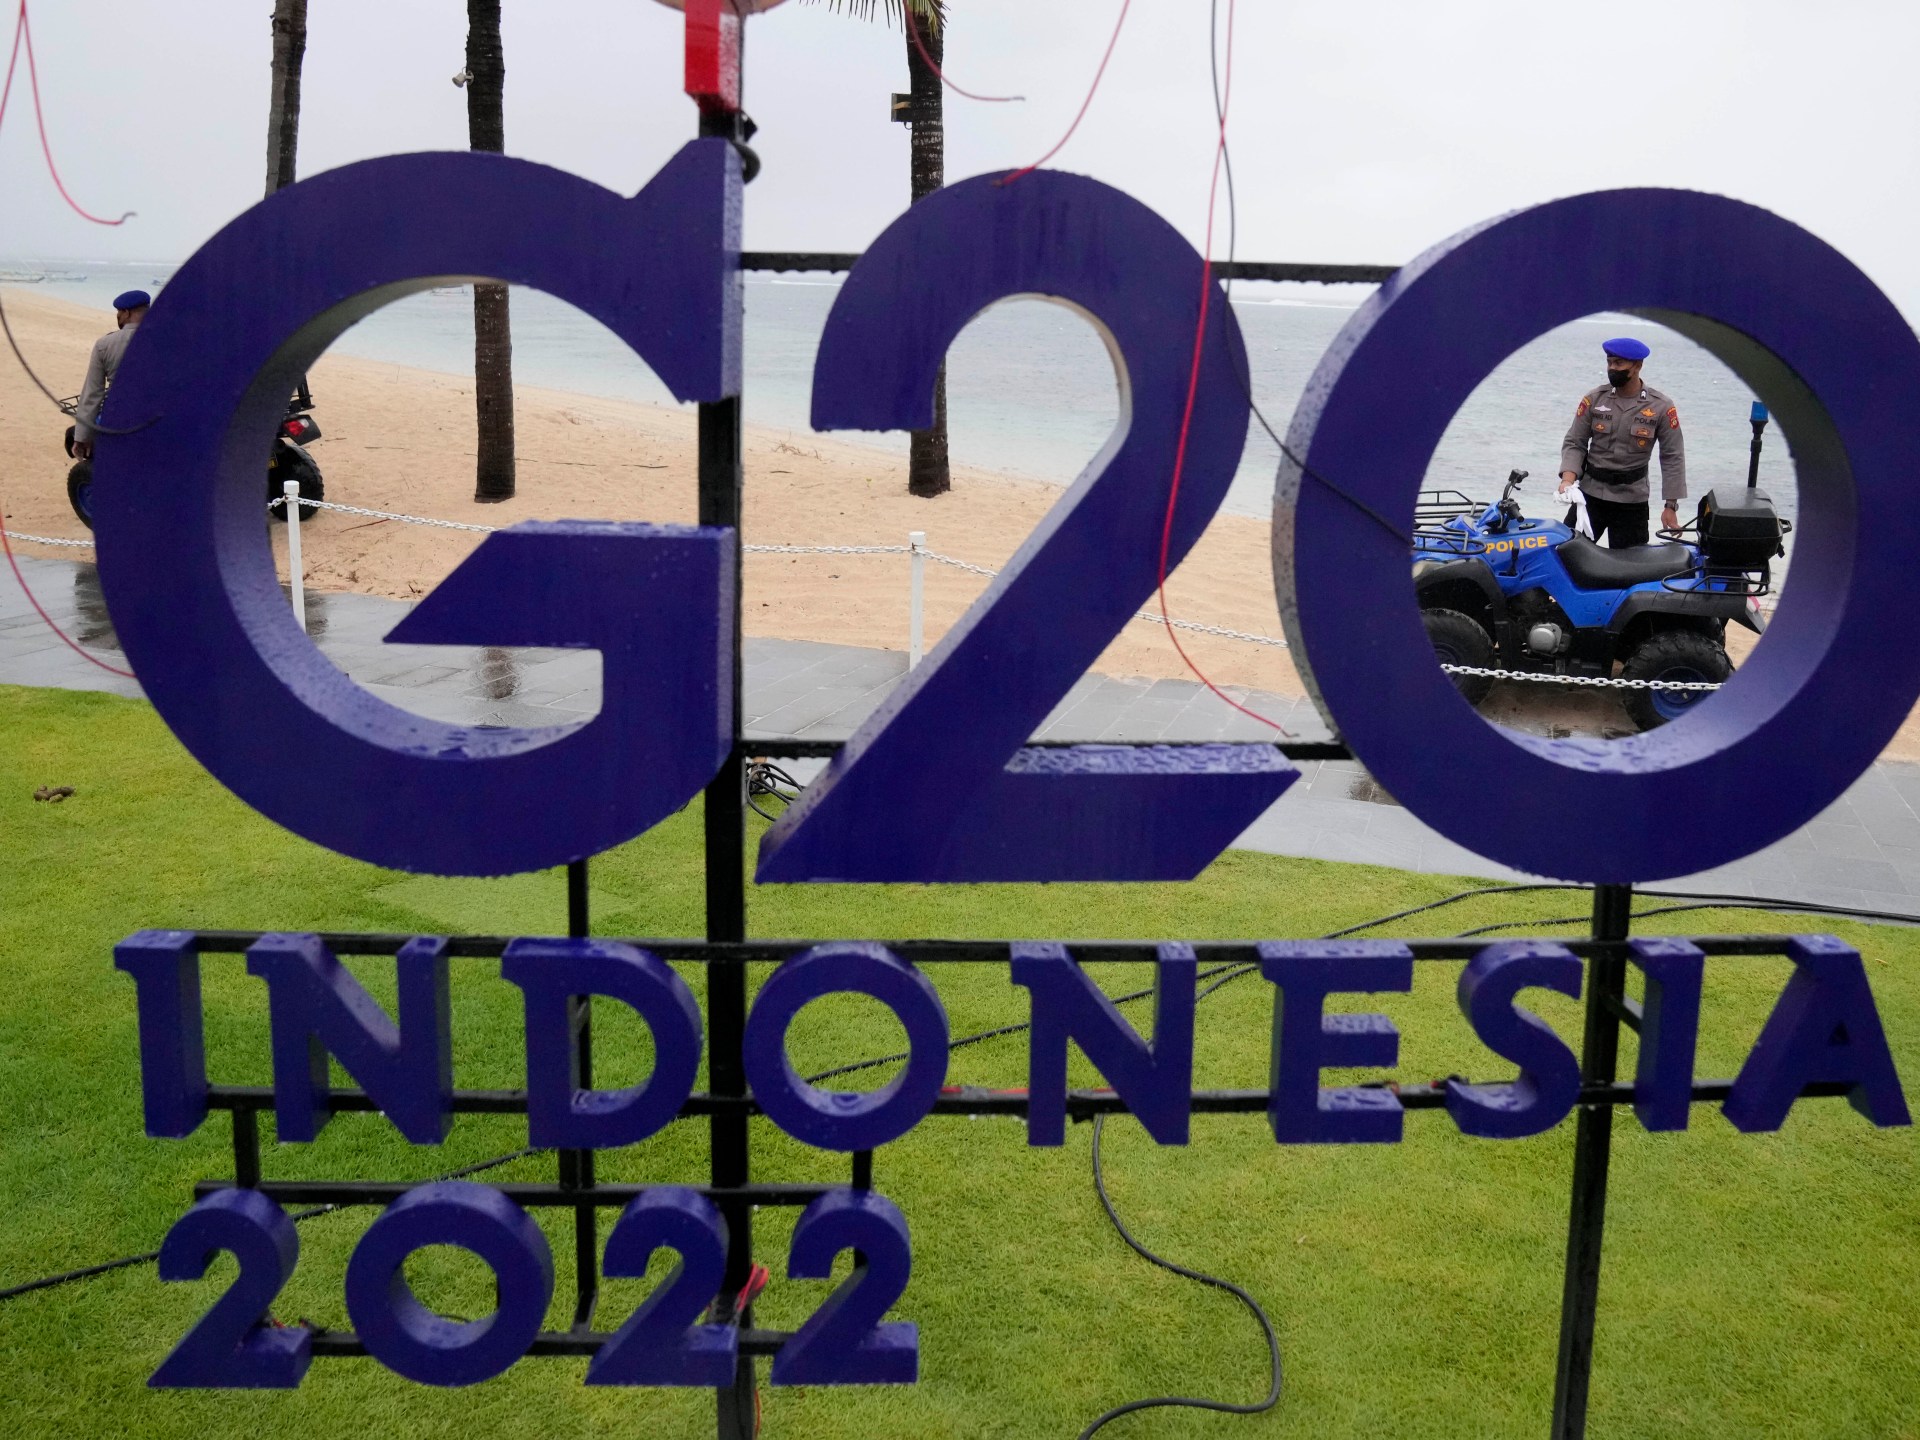 At G20, geopolitical tensions cloud economic agenda | Business and Economy